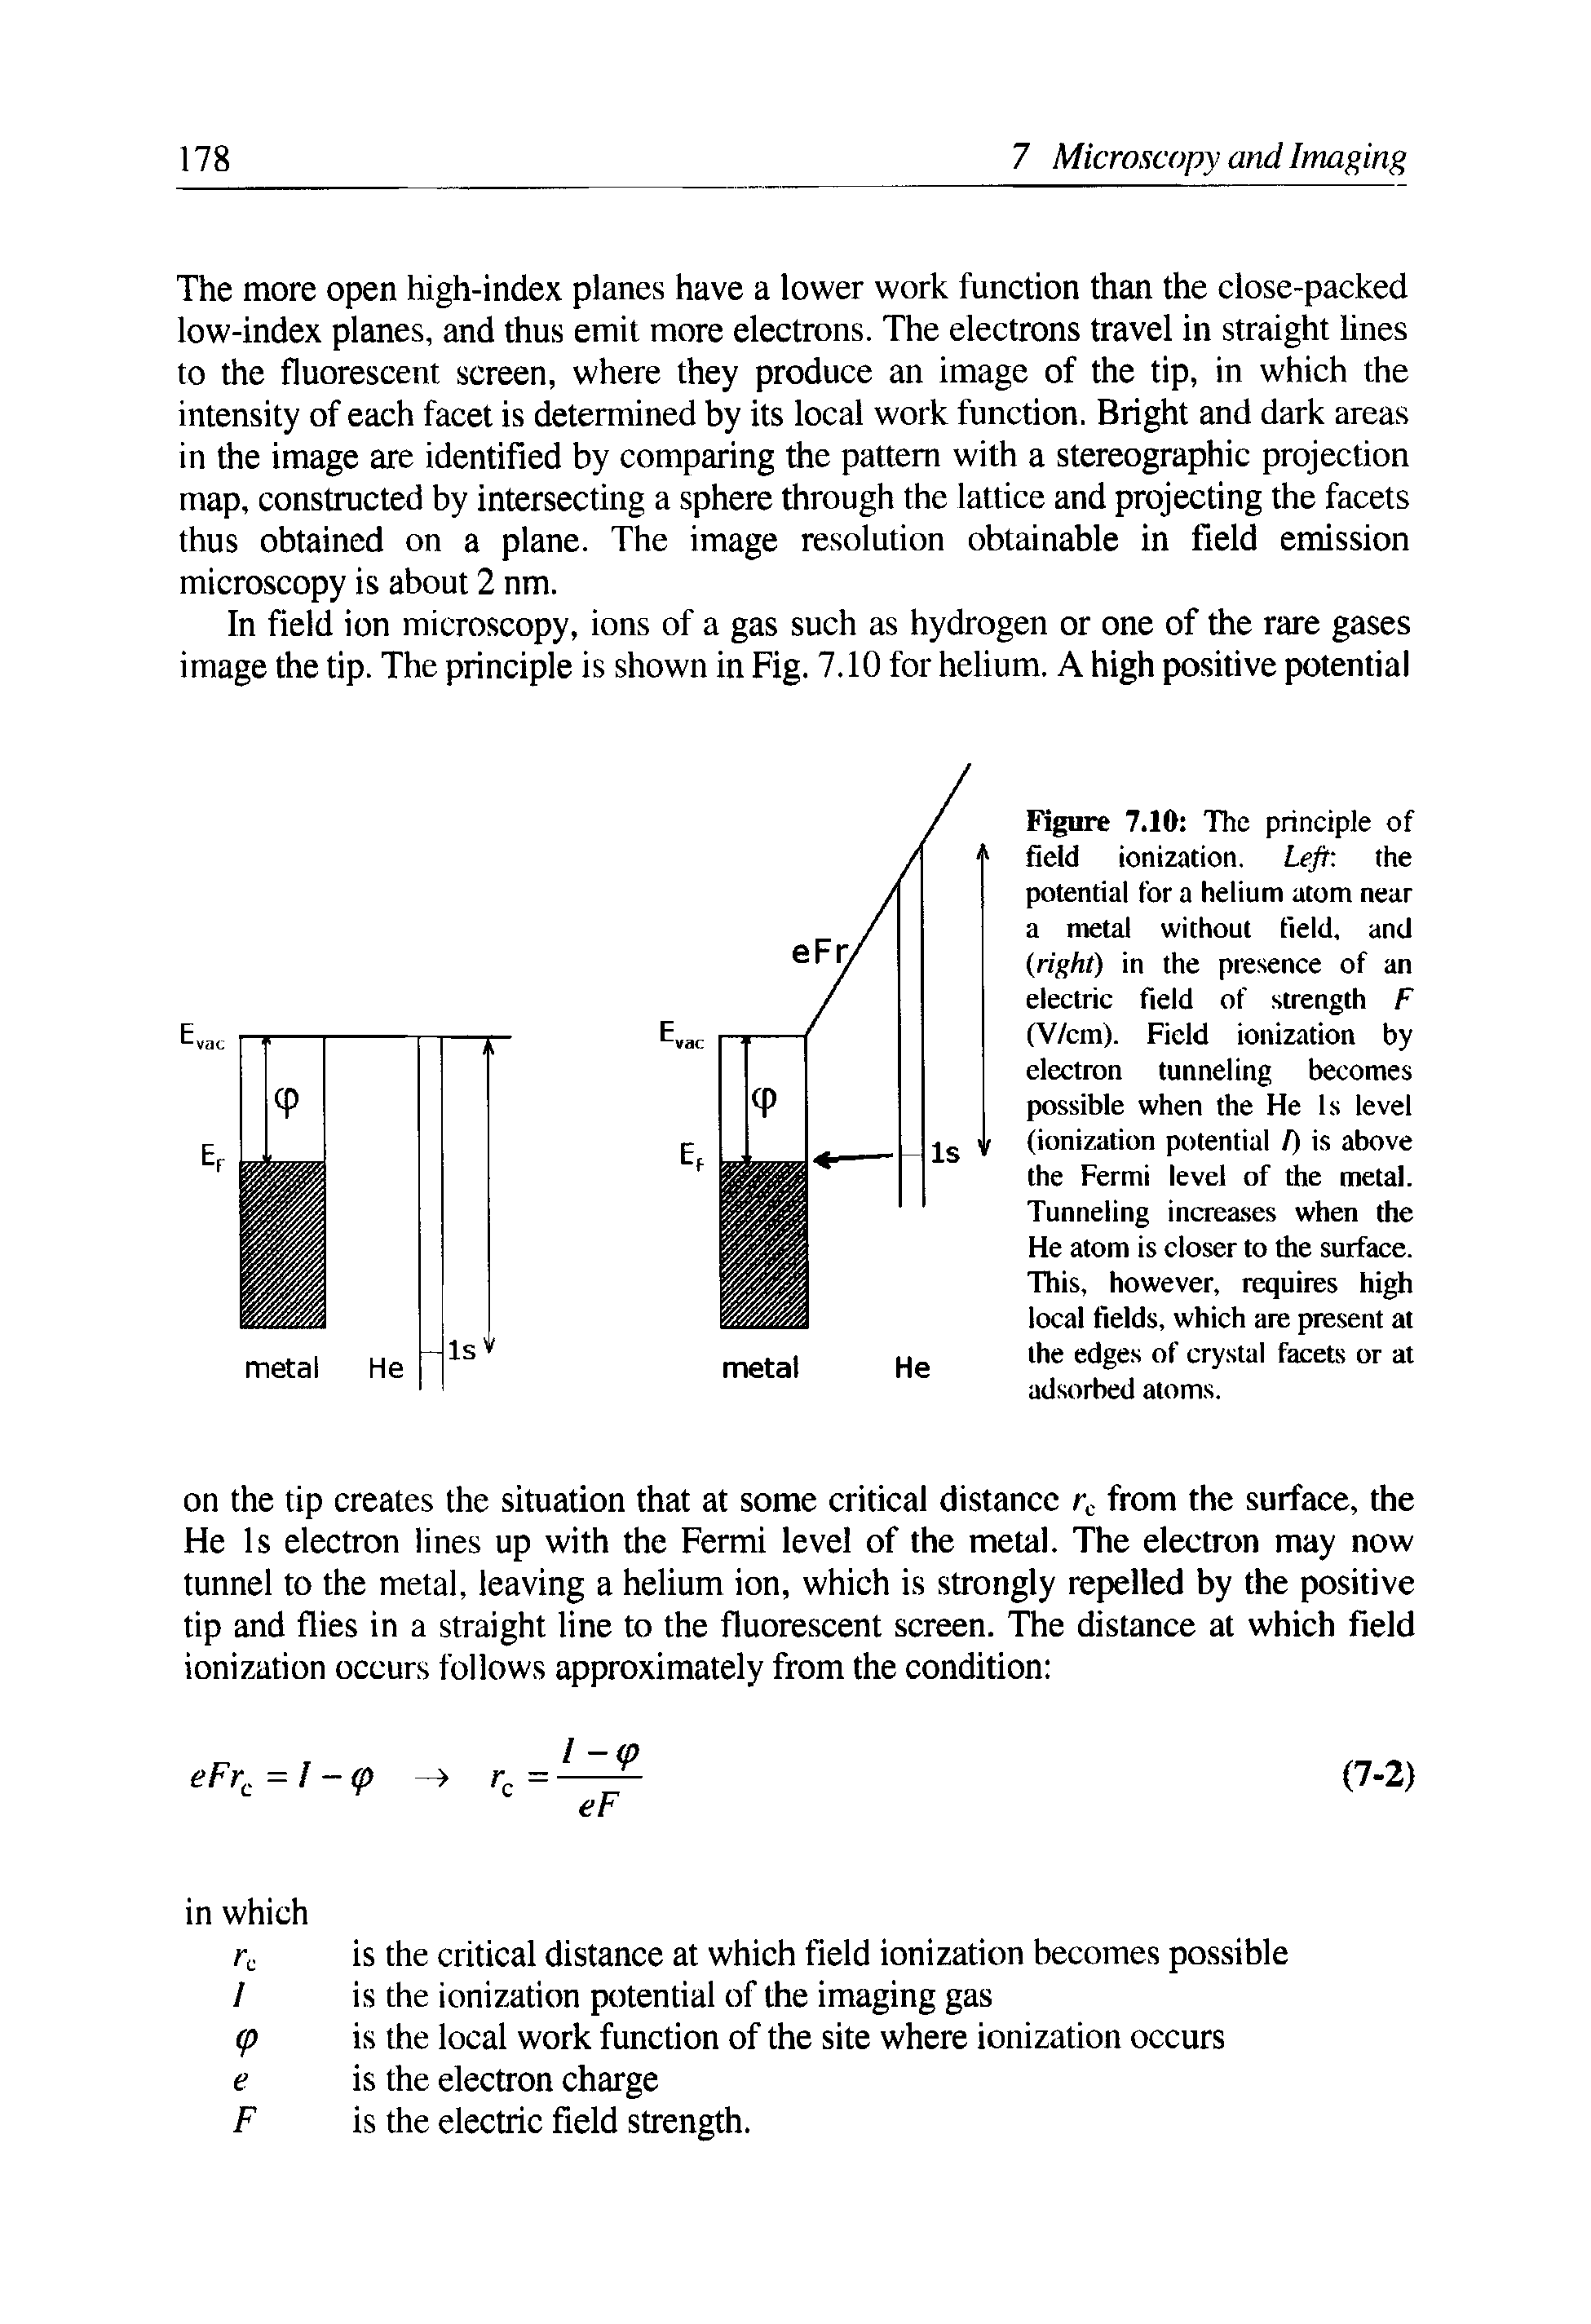 Figure 7.10 The principle of field ionization. Left the potential for a helium atom near a metal without field, and (right) in the presence of an electric field of strength F (V/cm). Field ionization by electron tunneling becomes possible when the He Is level (ionization potential /) is above the Fermi level of the metal. Tunneling increases when the He atom is closer to the surface. This, however, requires high local fields, which are present at the edges of crystal facets or at adsorbed atoms.